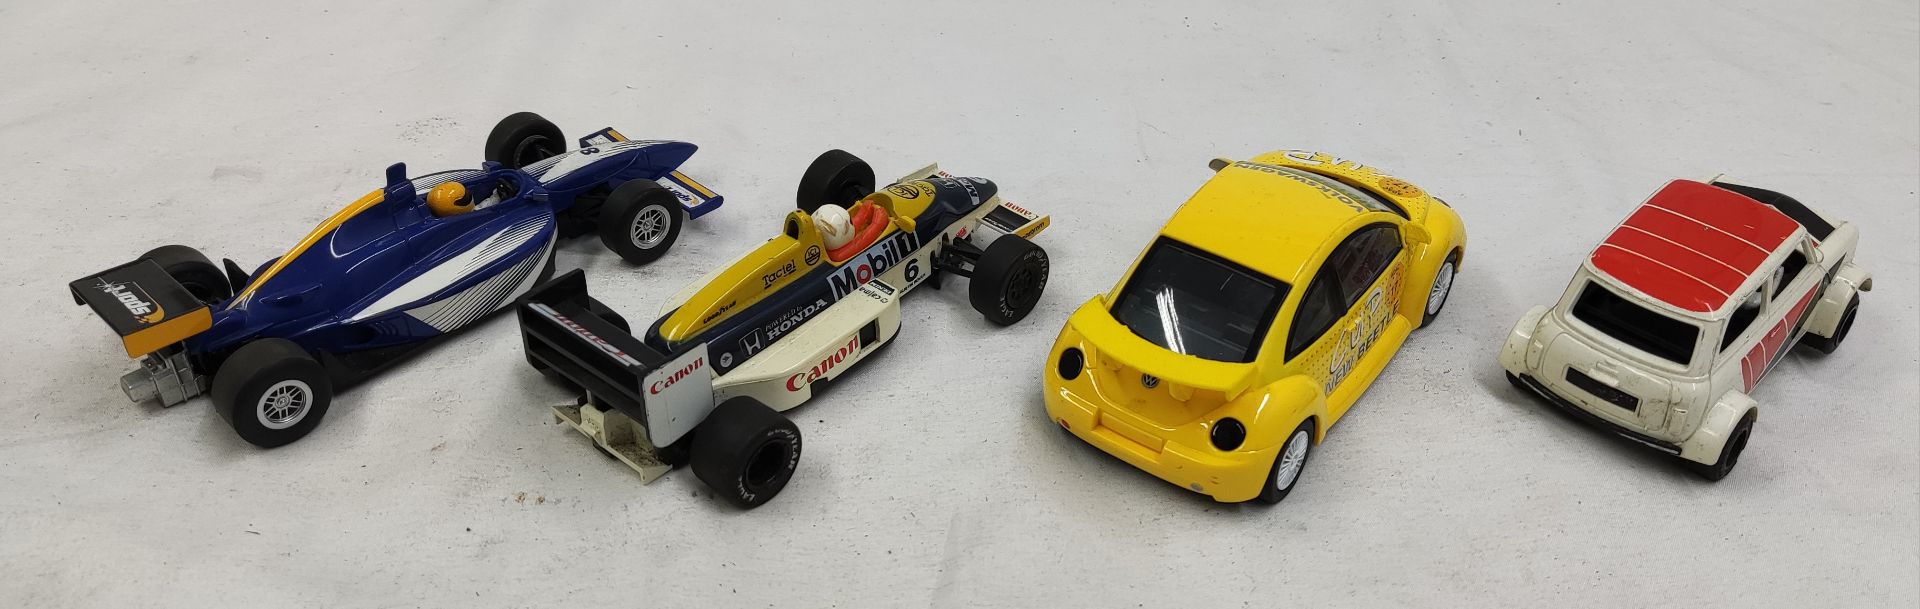 4 x Scalextric Cars Including VW Beetle, F1 Car, Open Wheeler and Mini Clubman 1275GT - Tested and - Image 7 of 11